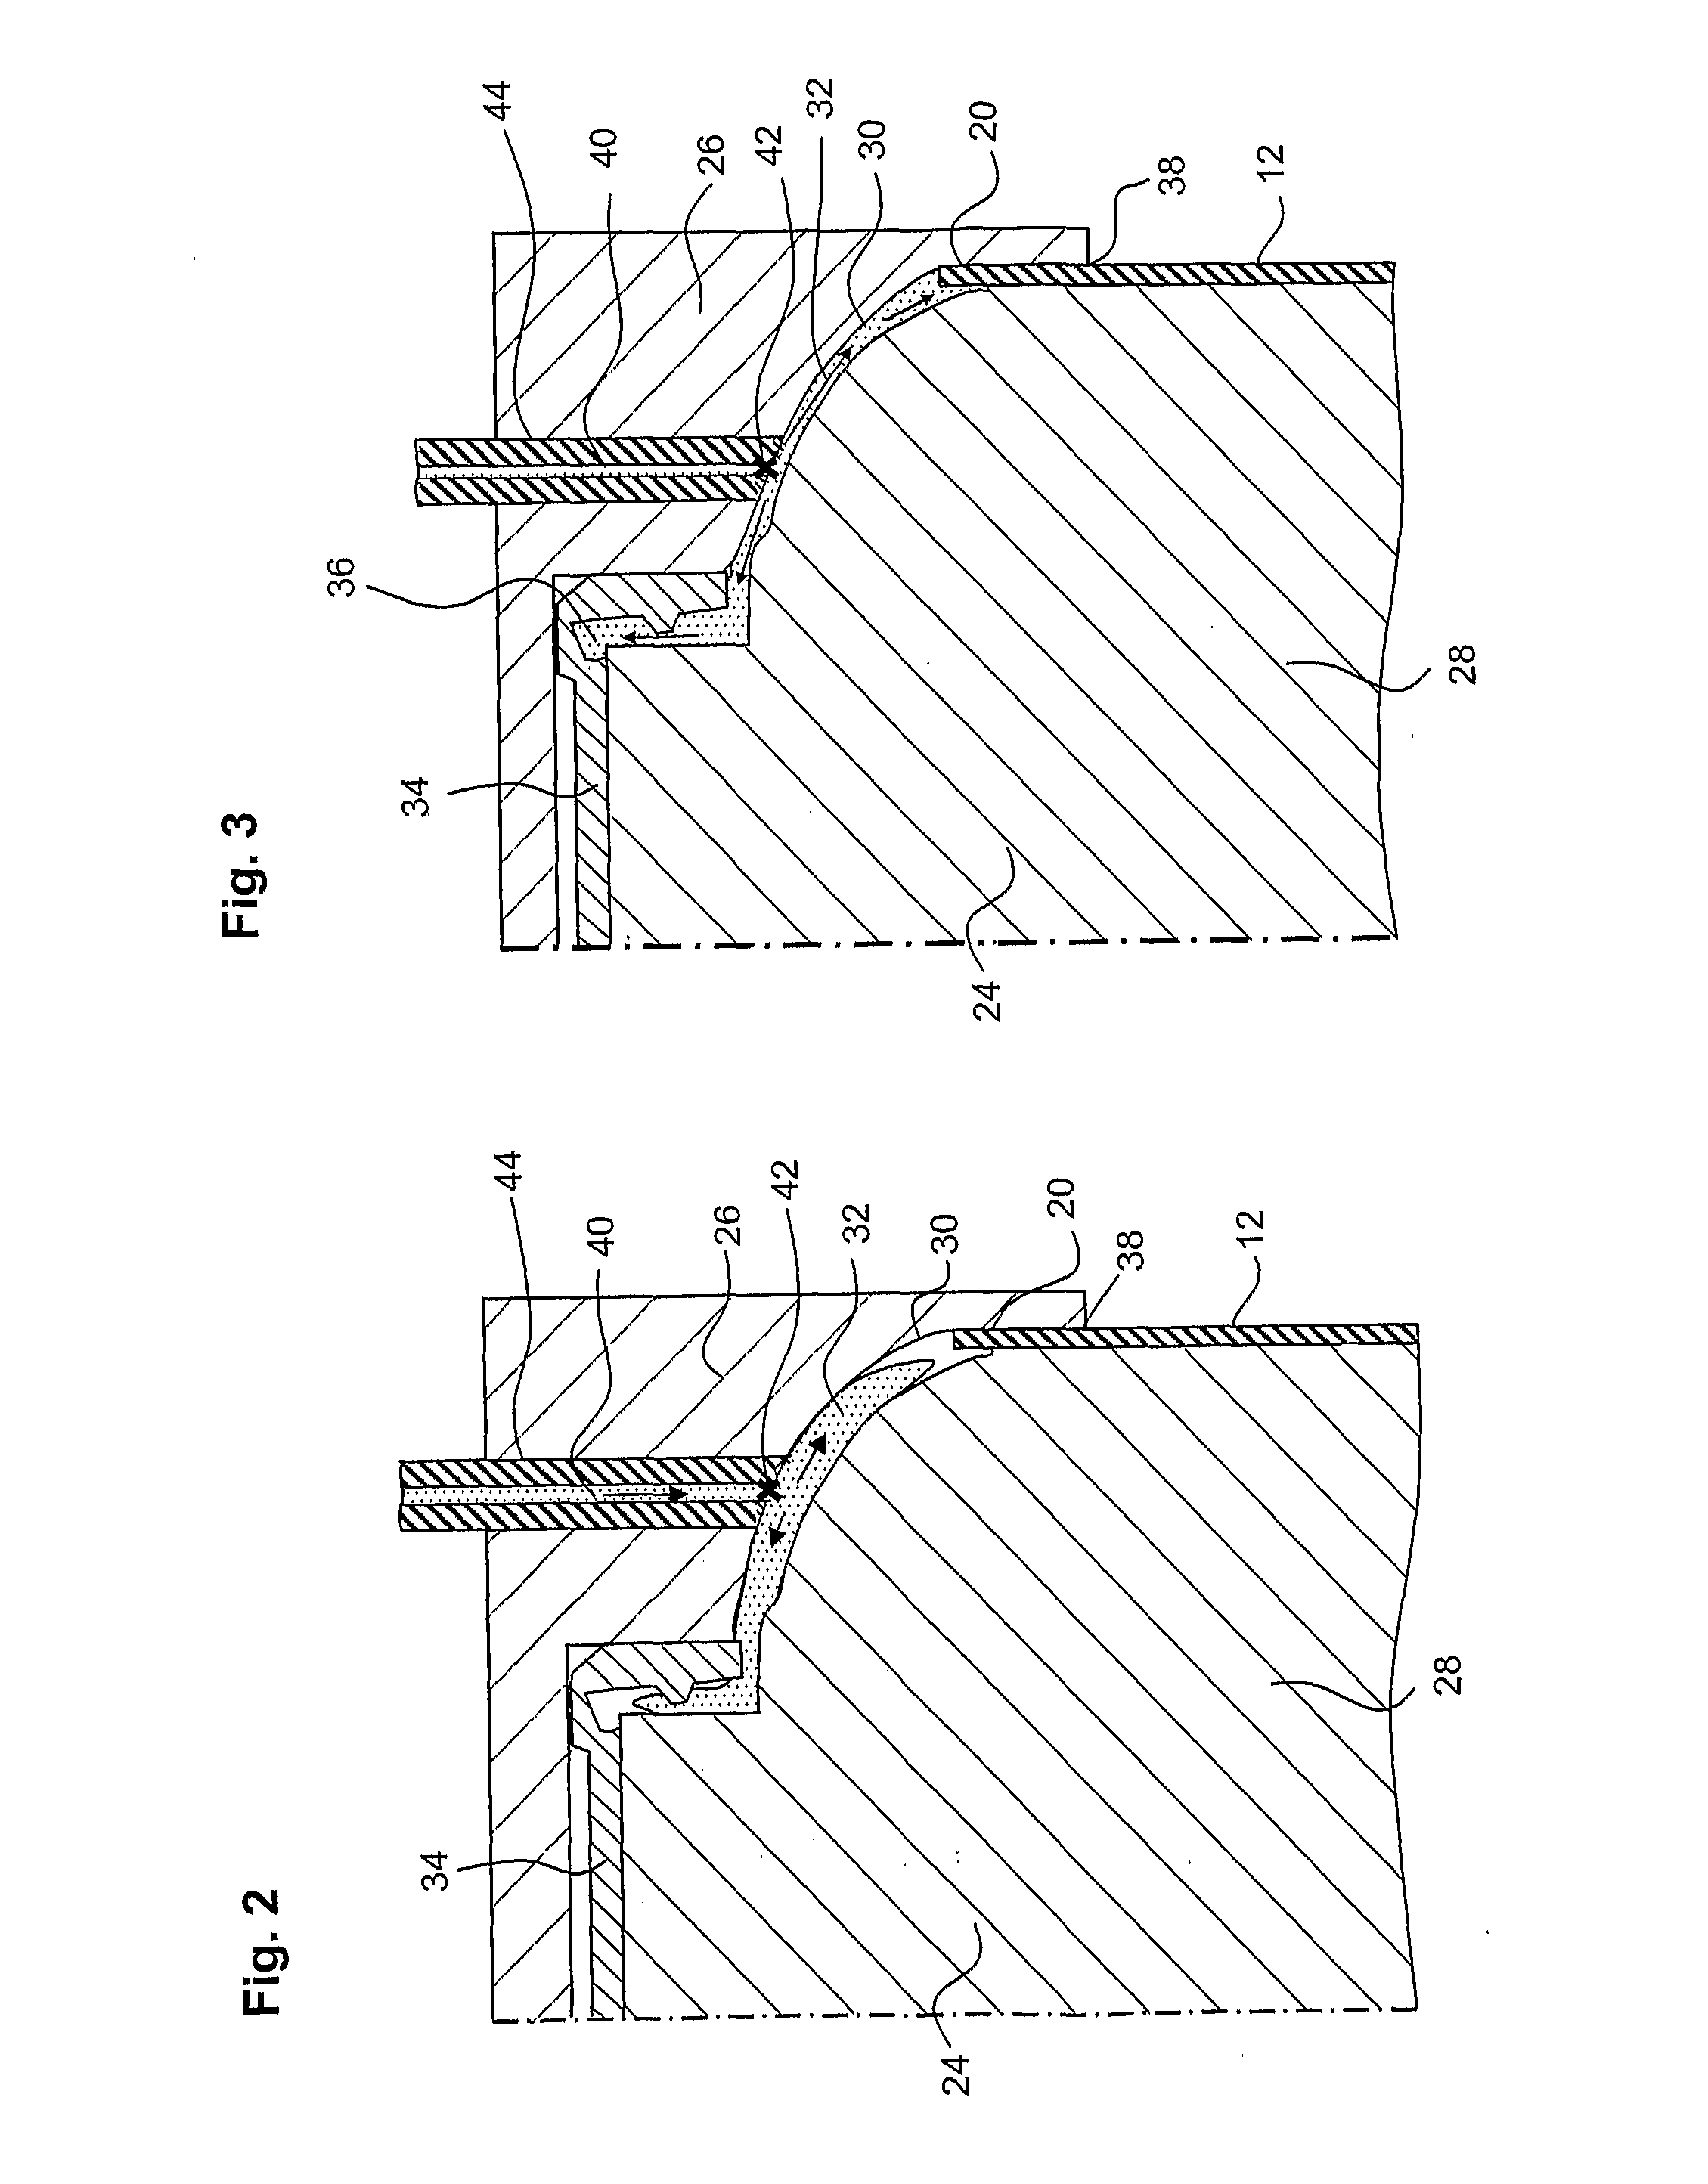 Apparatus for moulding a part of a packaging container